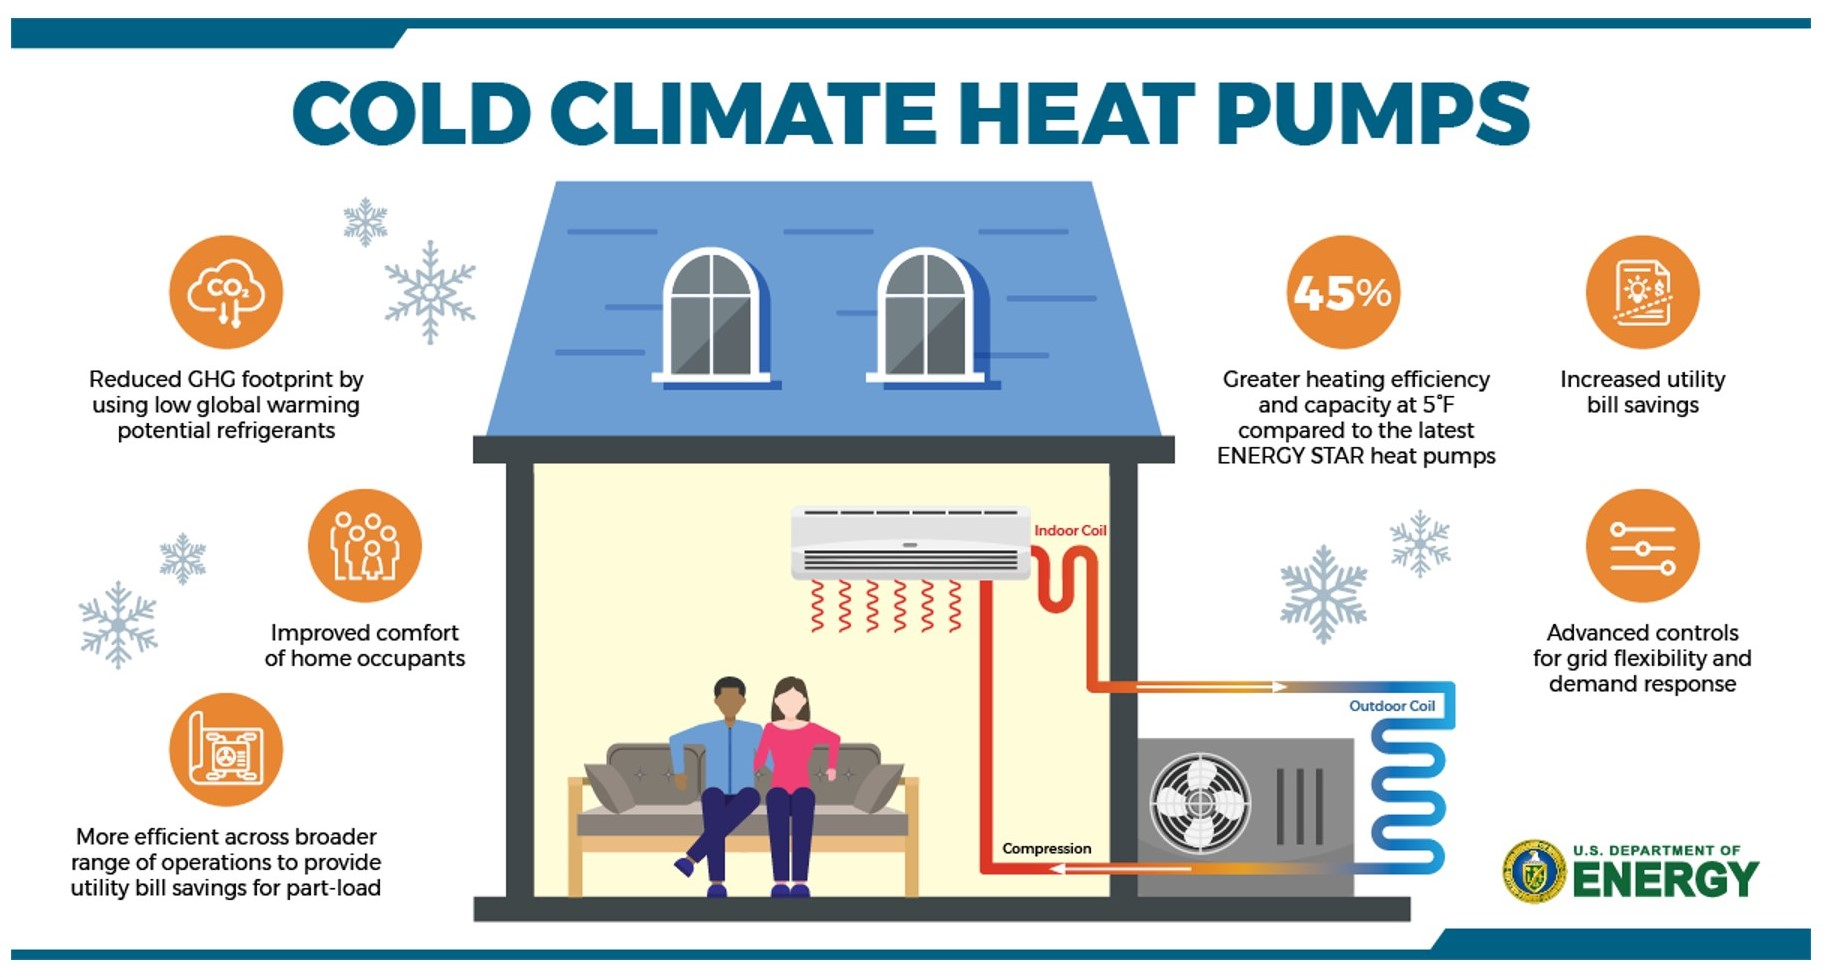 Benefits of cold climate heat pumps